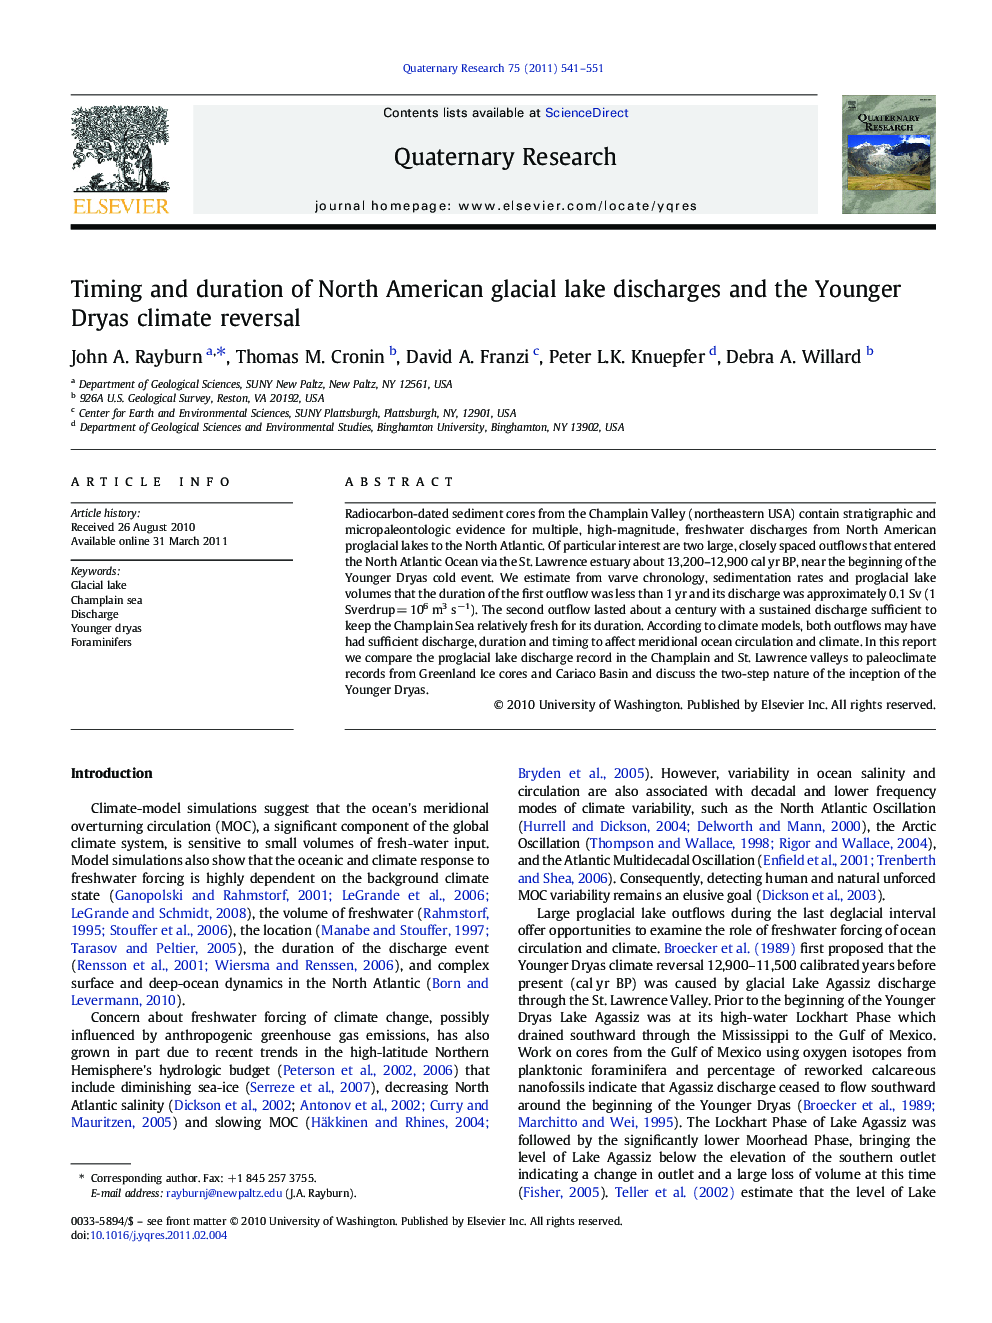 Timing and duration of North American glacial lake discharges and the Younger Dryas climate reversal